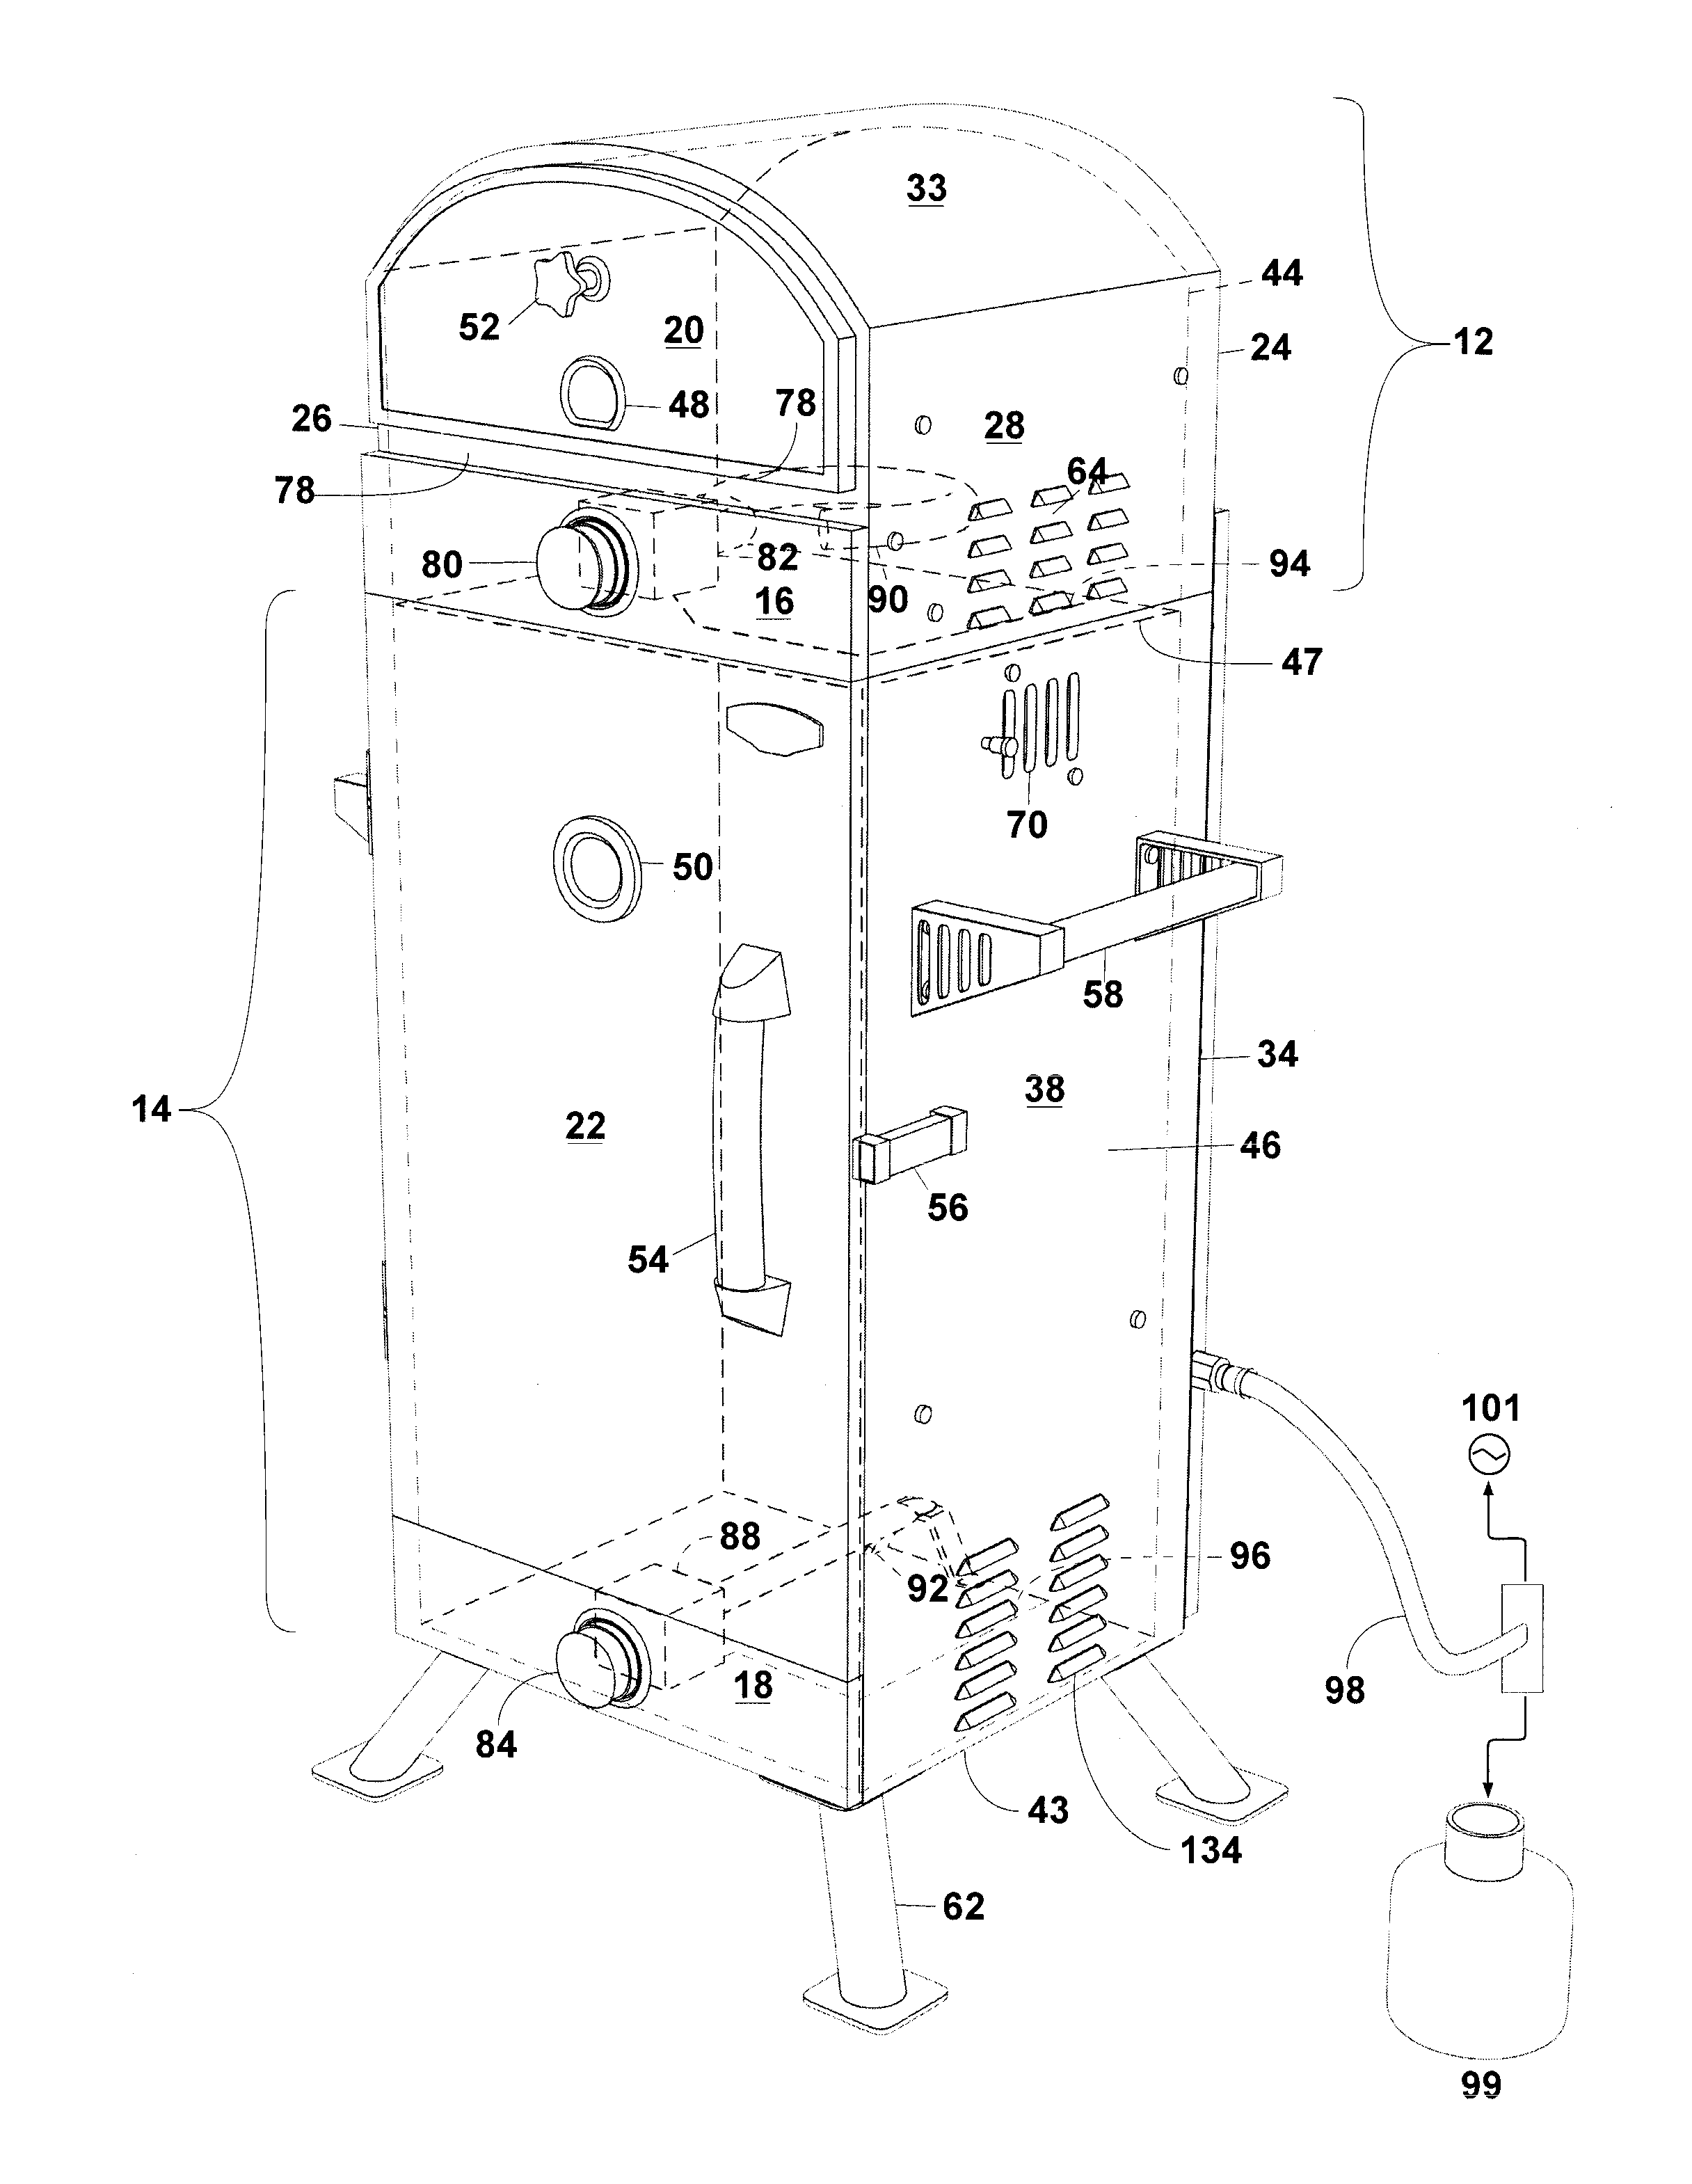 Apparatus for cooking and smoking food